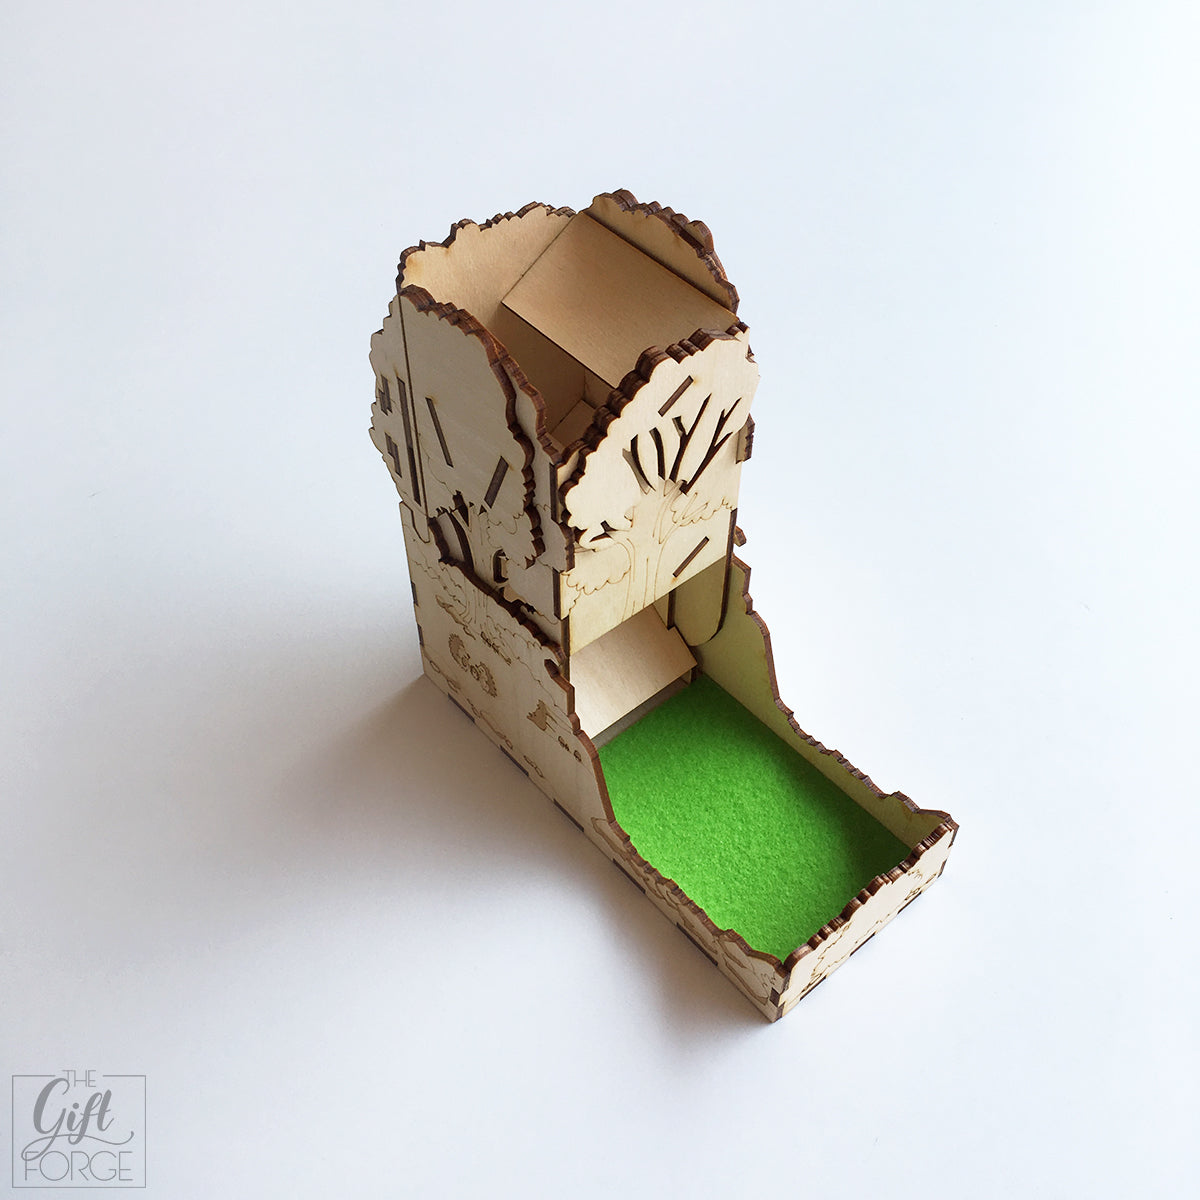 Forest dice tower